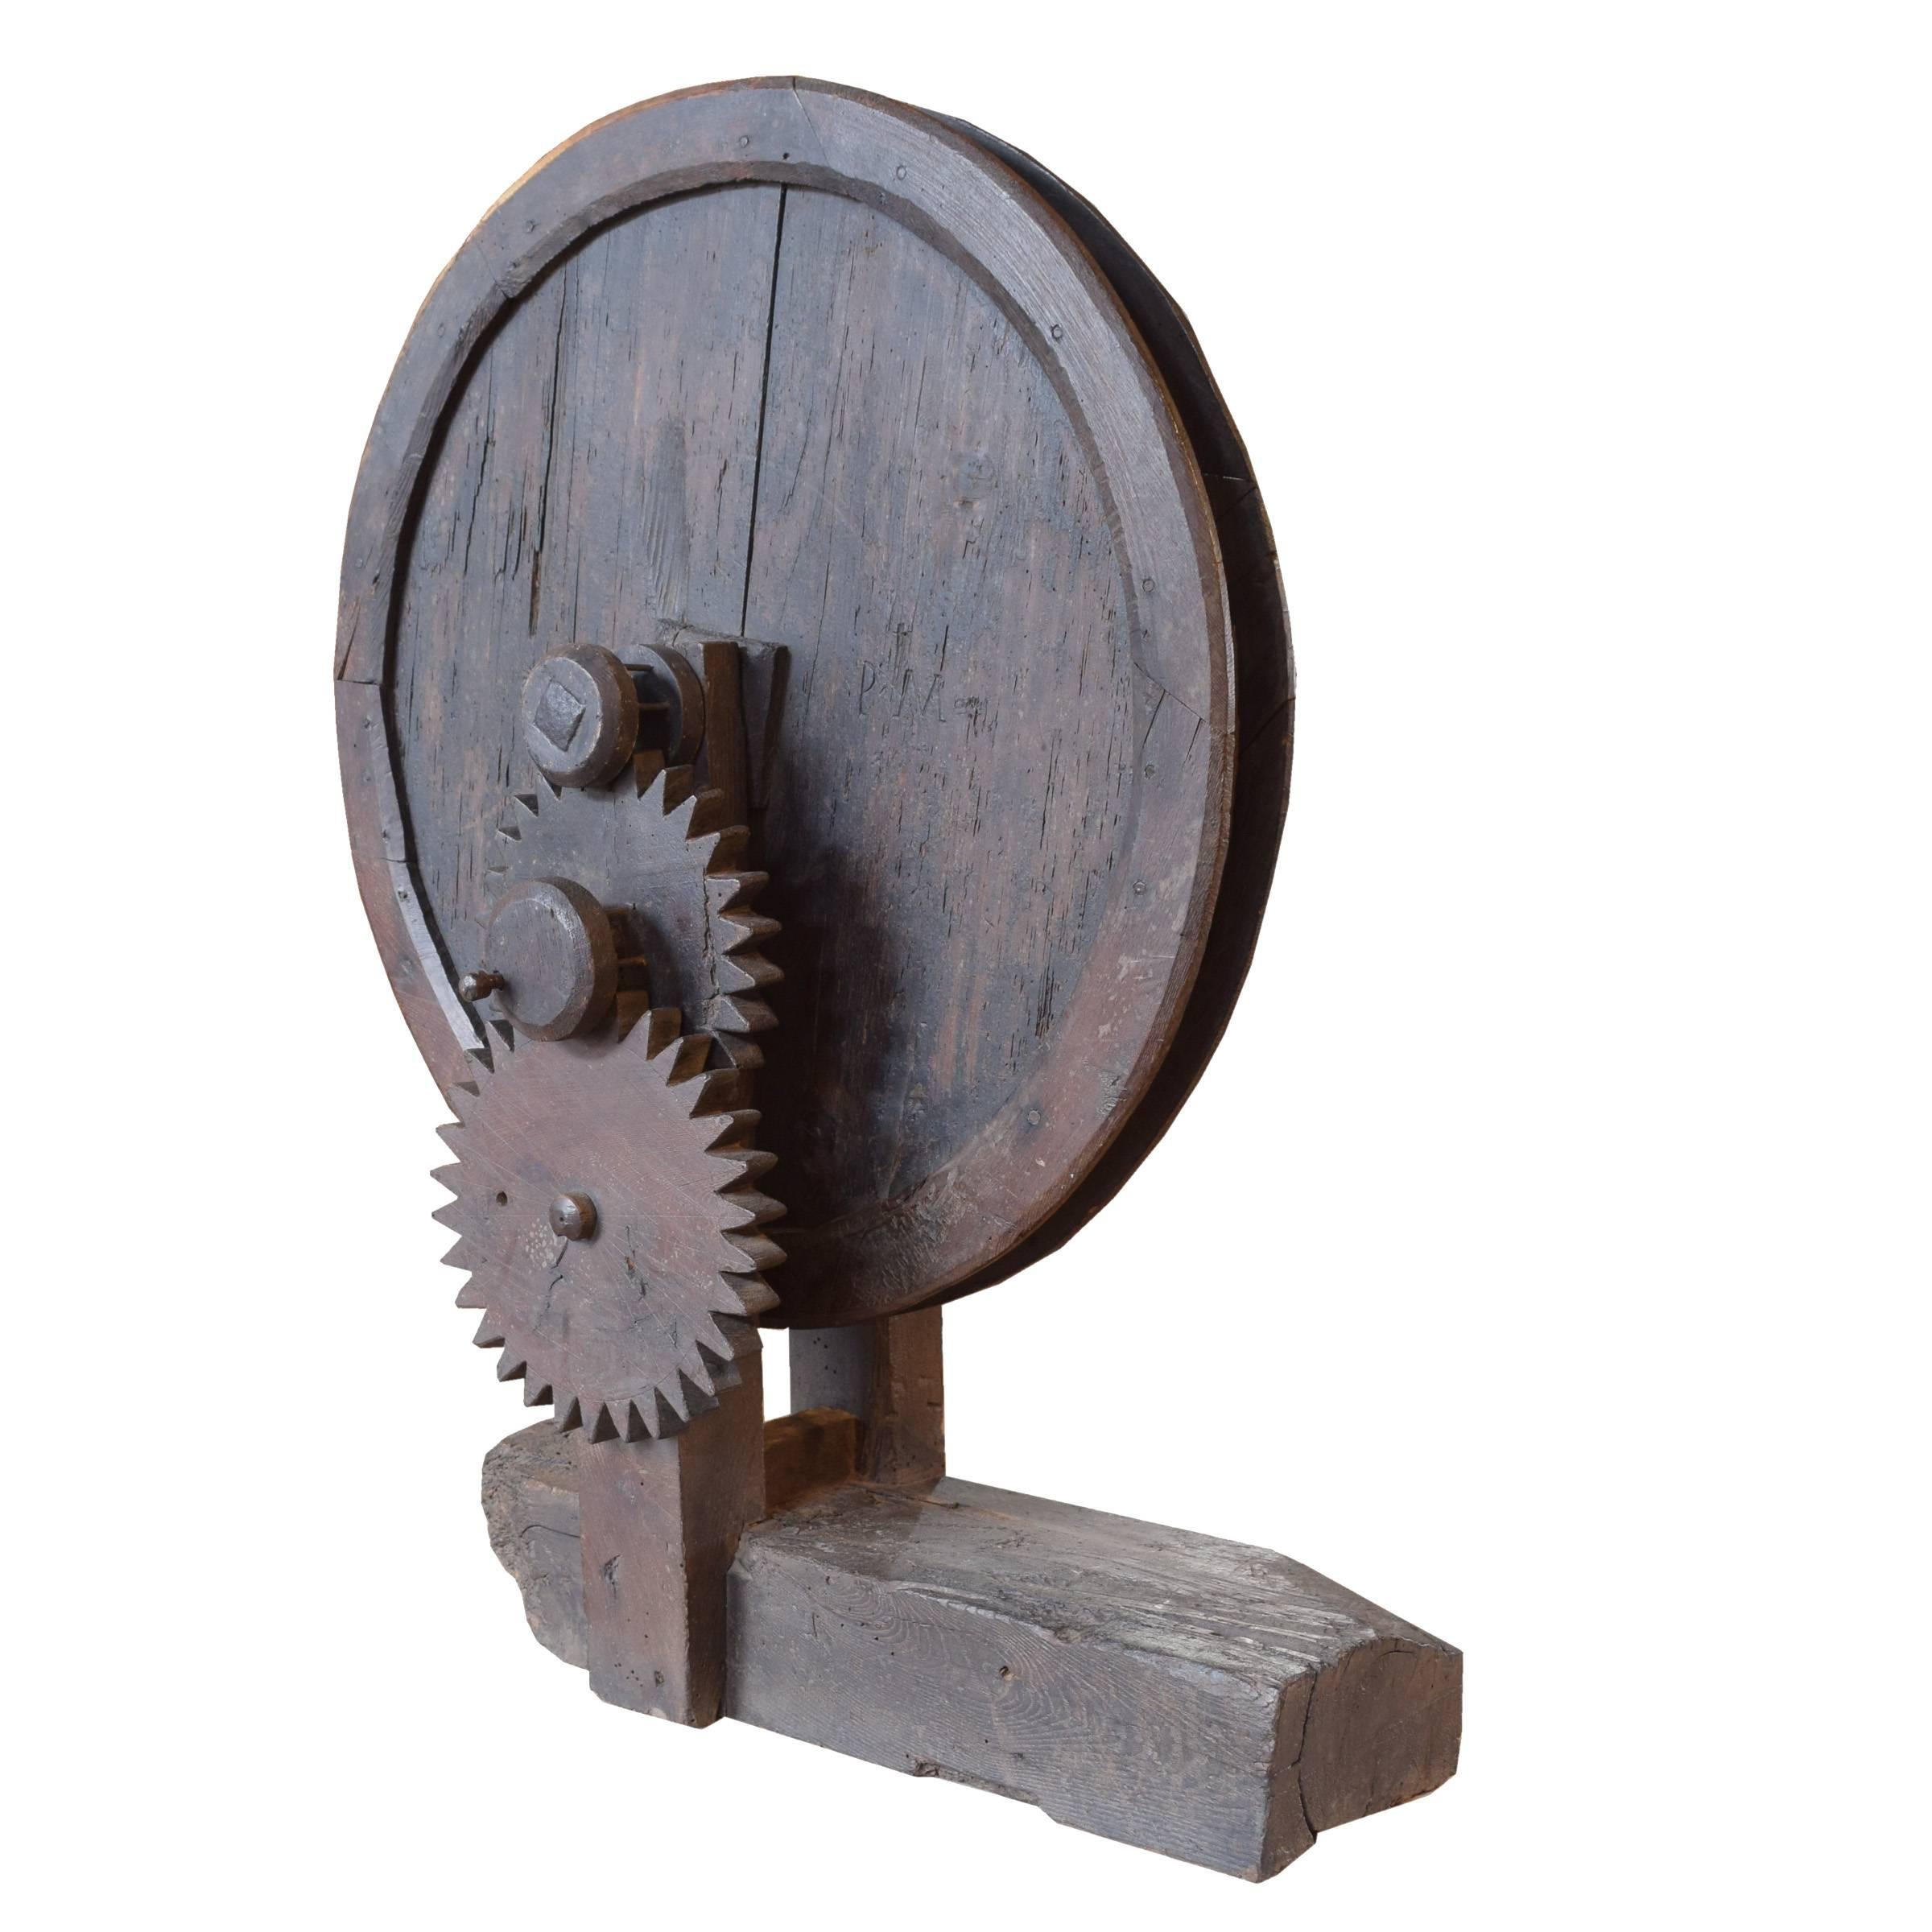 A wonderfully sculptural ancient Italian wood gears and handle from an early clock, circa 16th century.